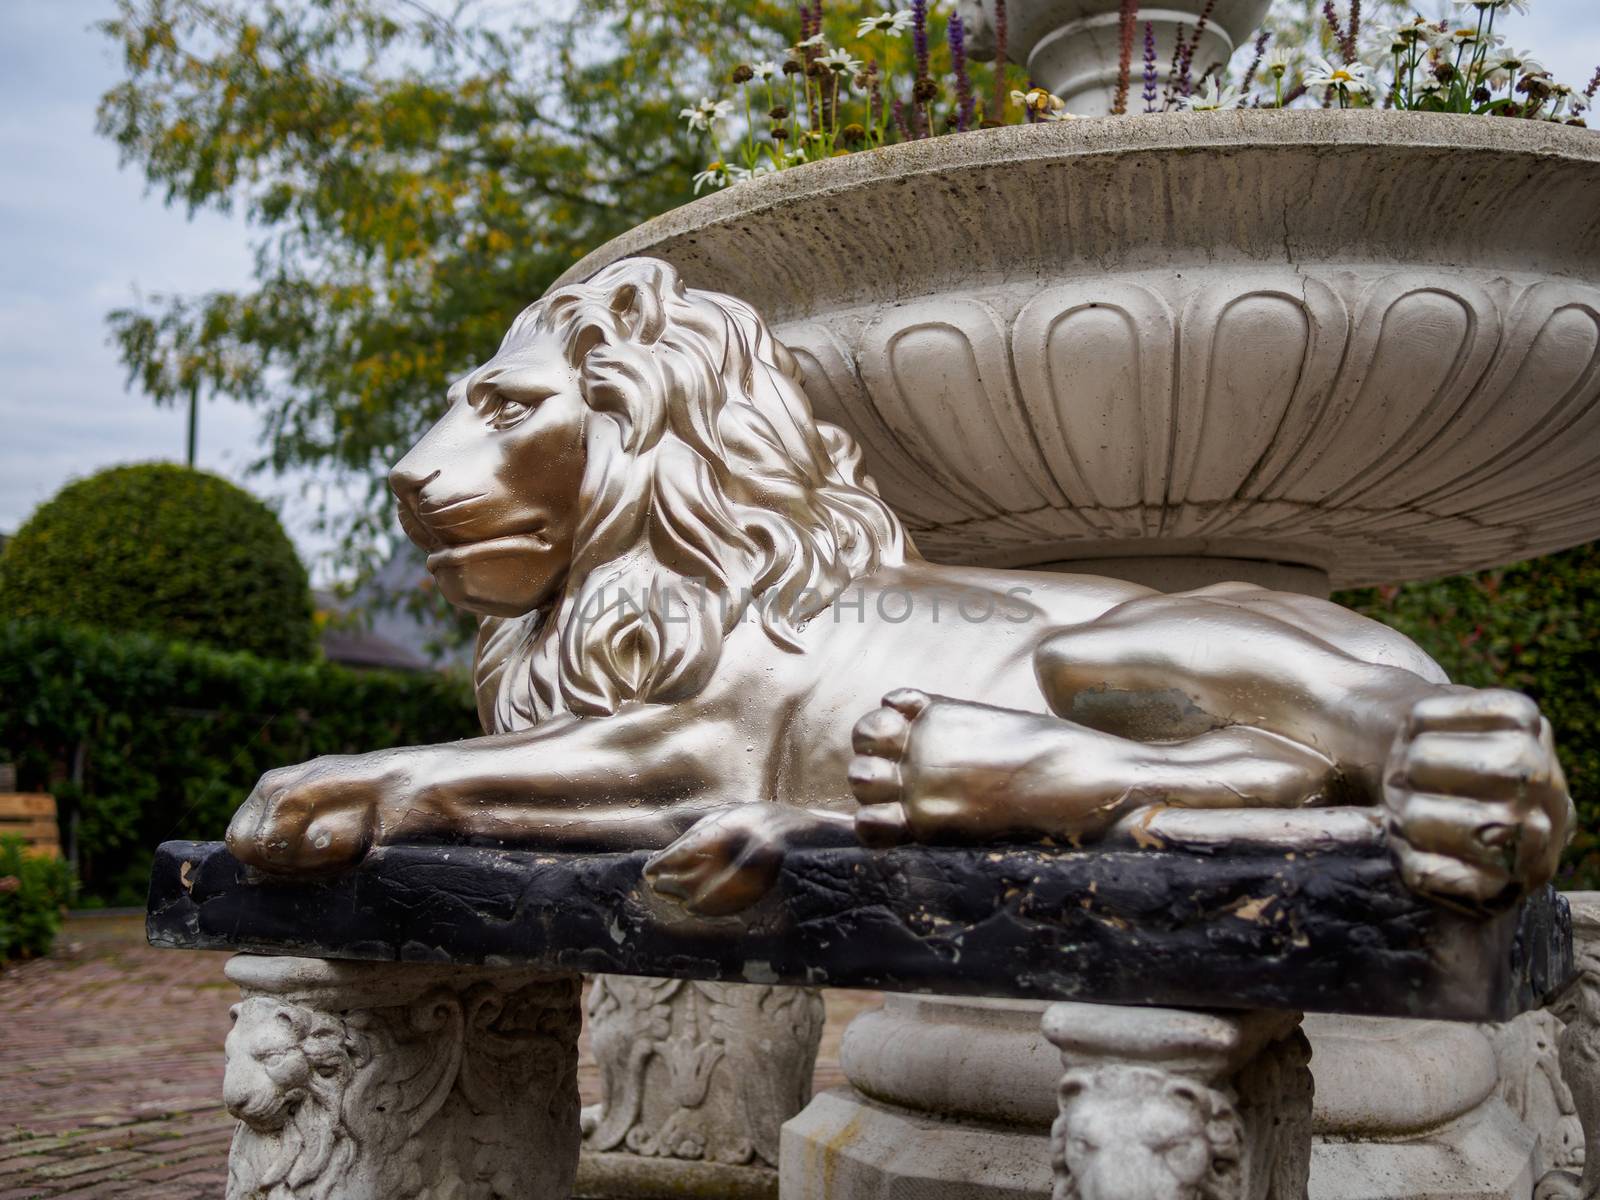 Lying proud under a stone fountain is this large silver lyon statue